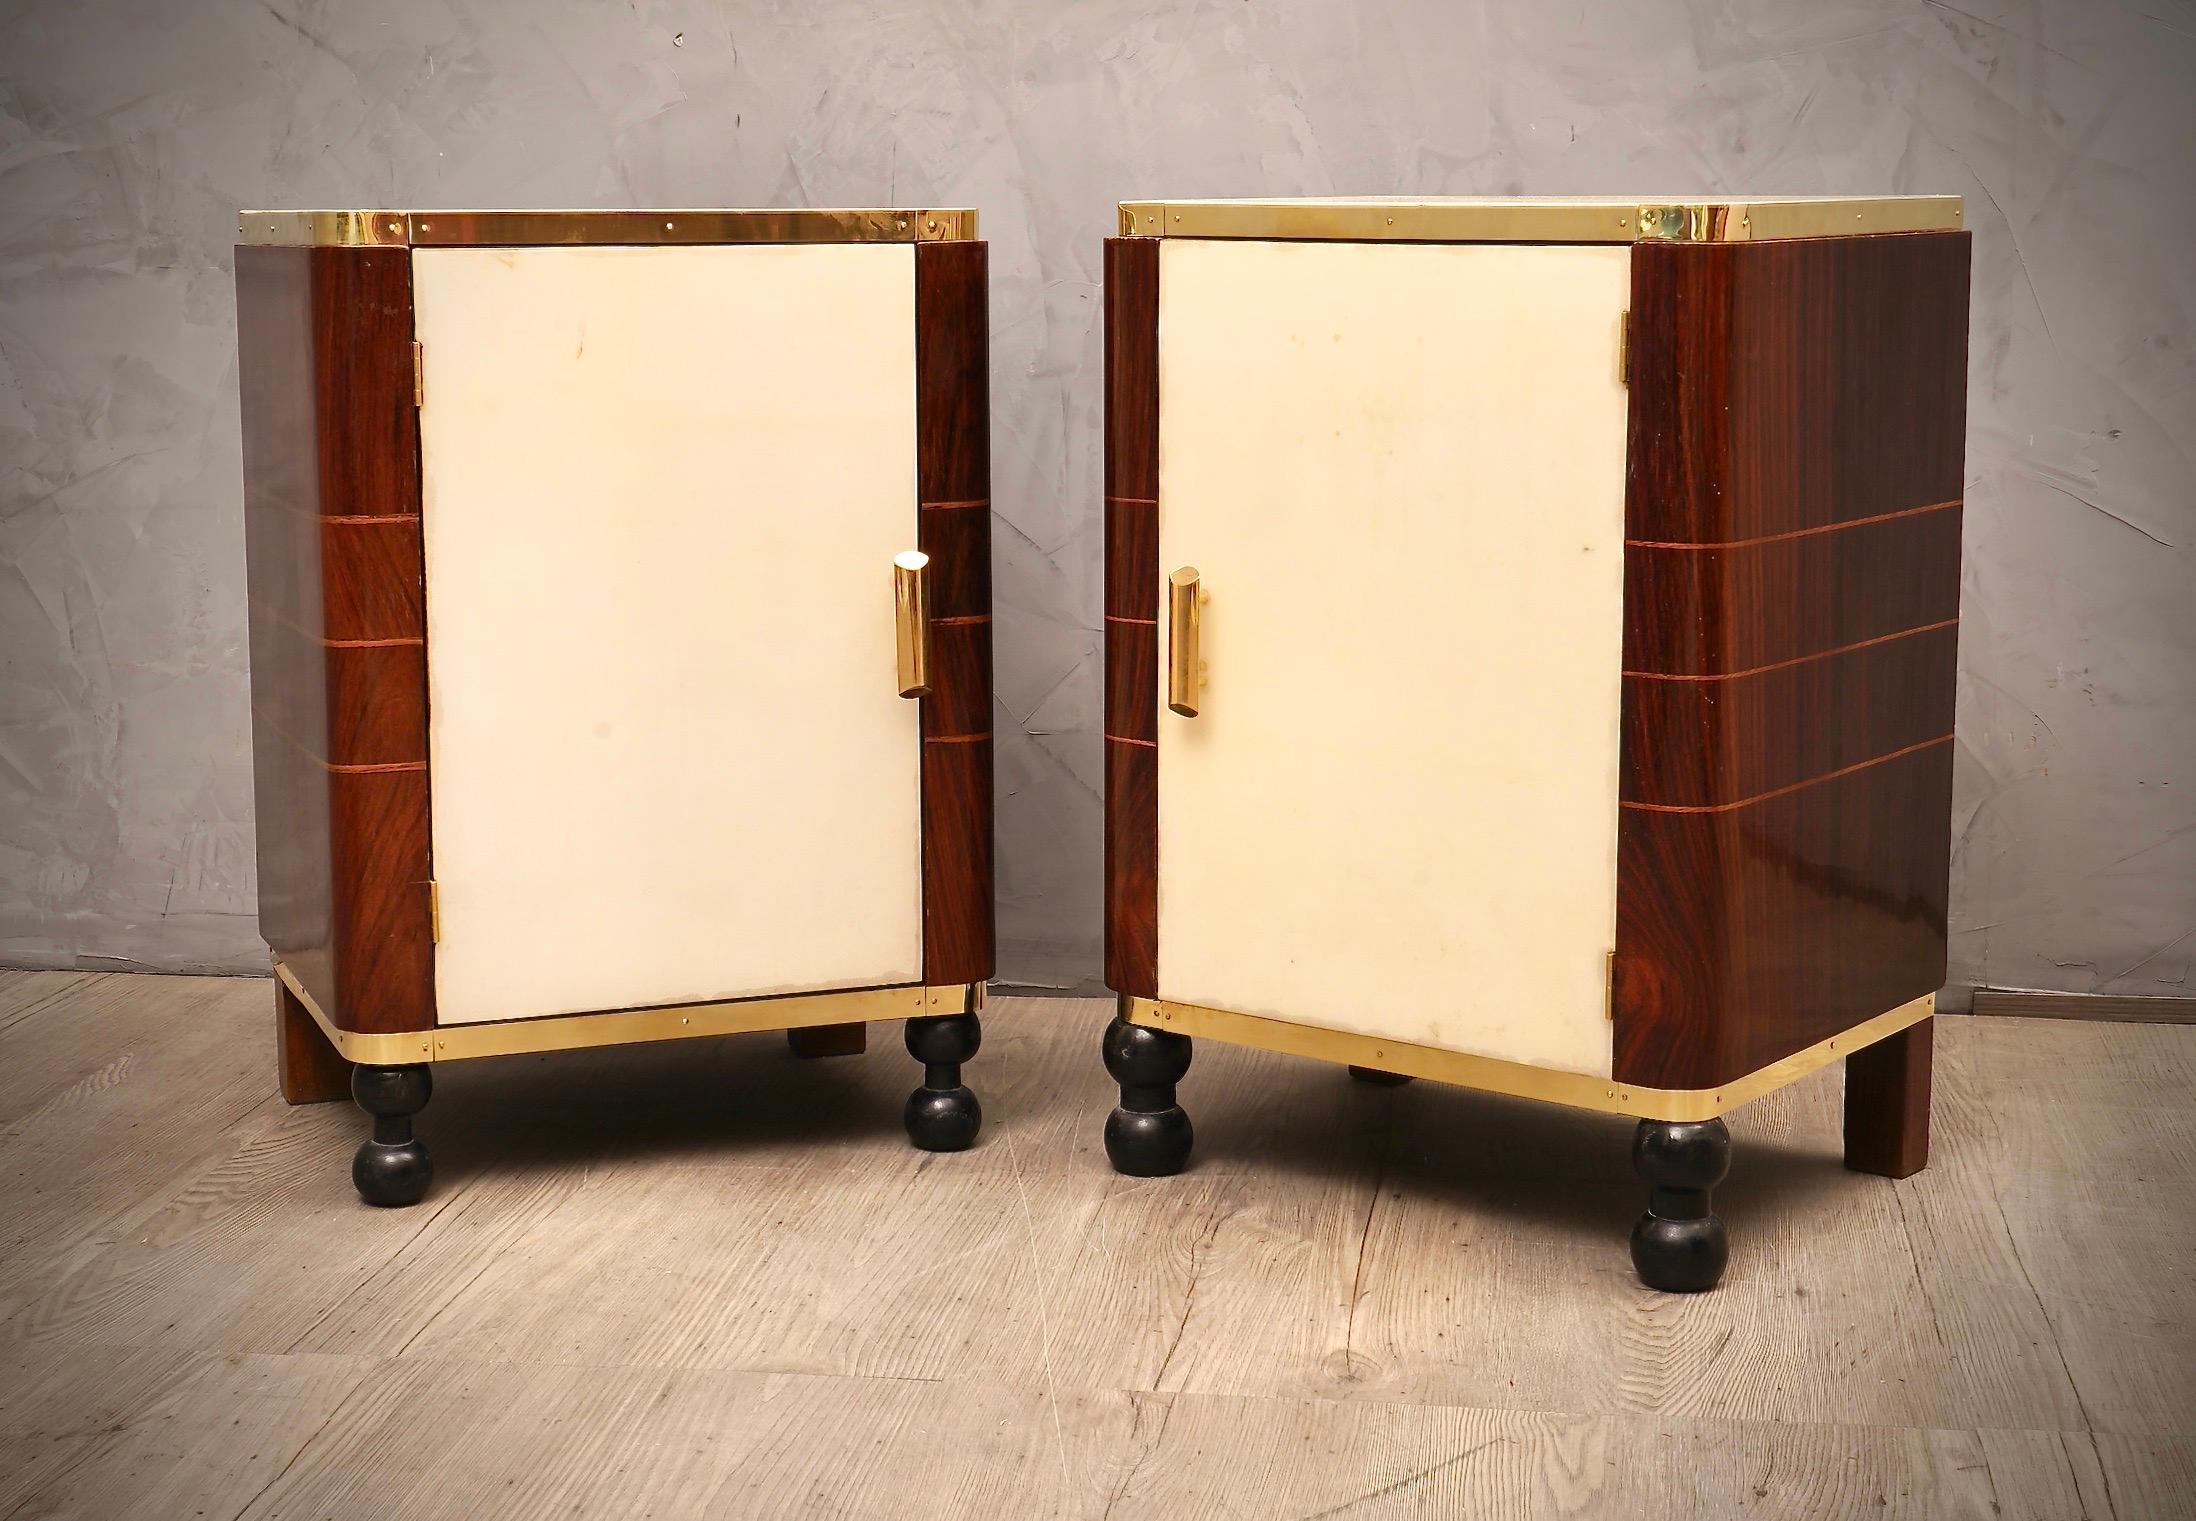 Pair of nightstands from the midcentury, well articulated and finished. With its unique features and meticulous attention to detail, these nightstands are a testament to the innovative vision of the time, and furthermore their cornerless curves lead